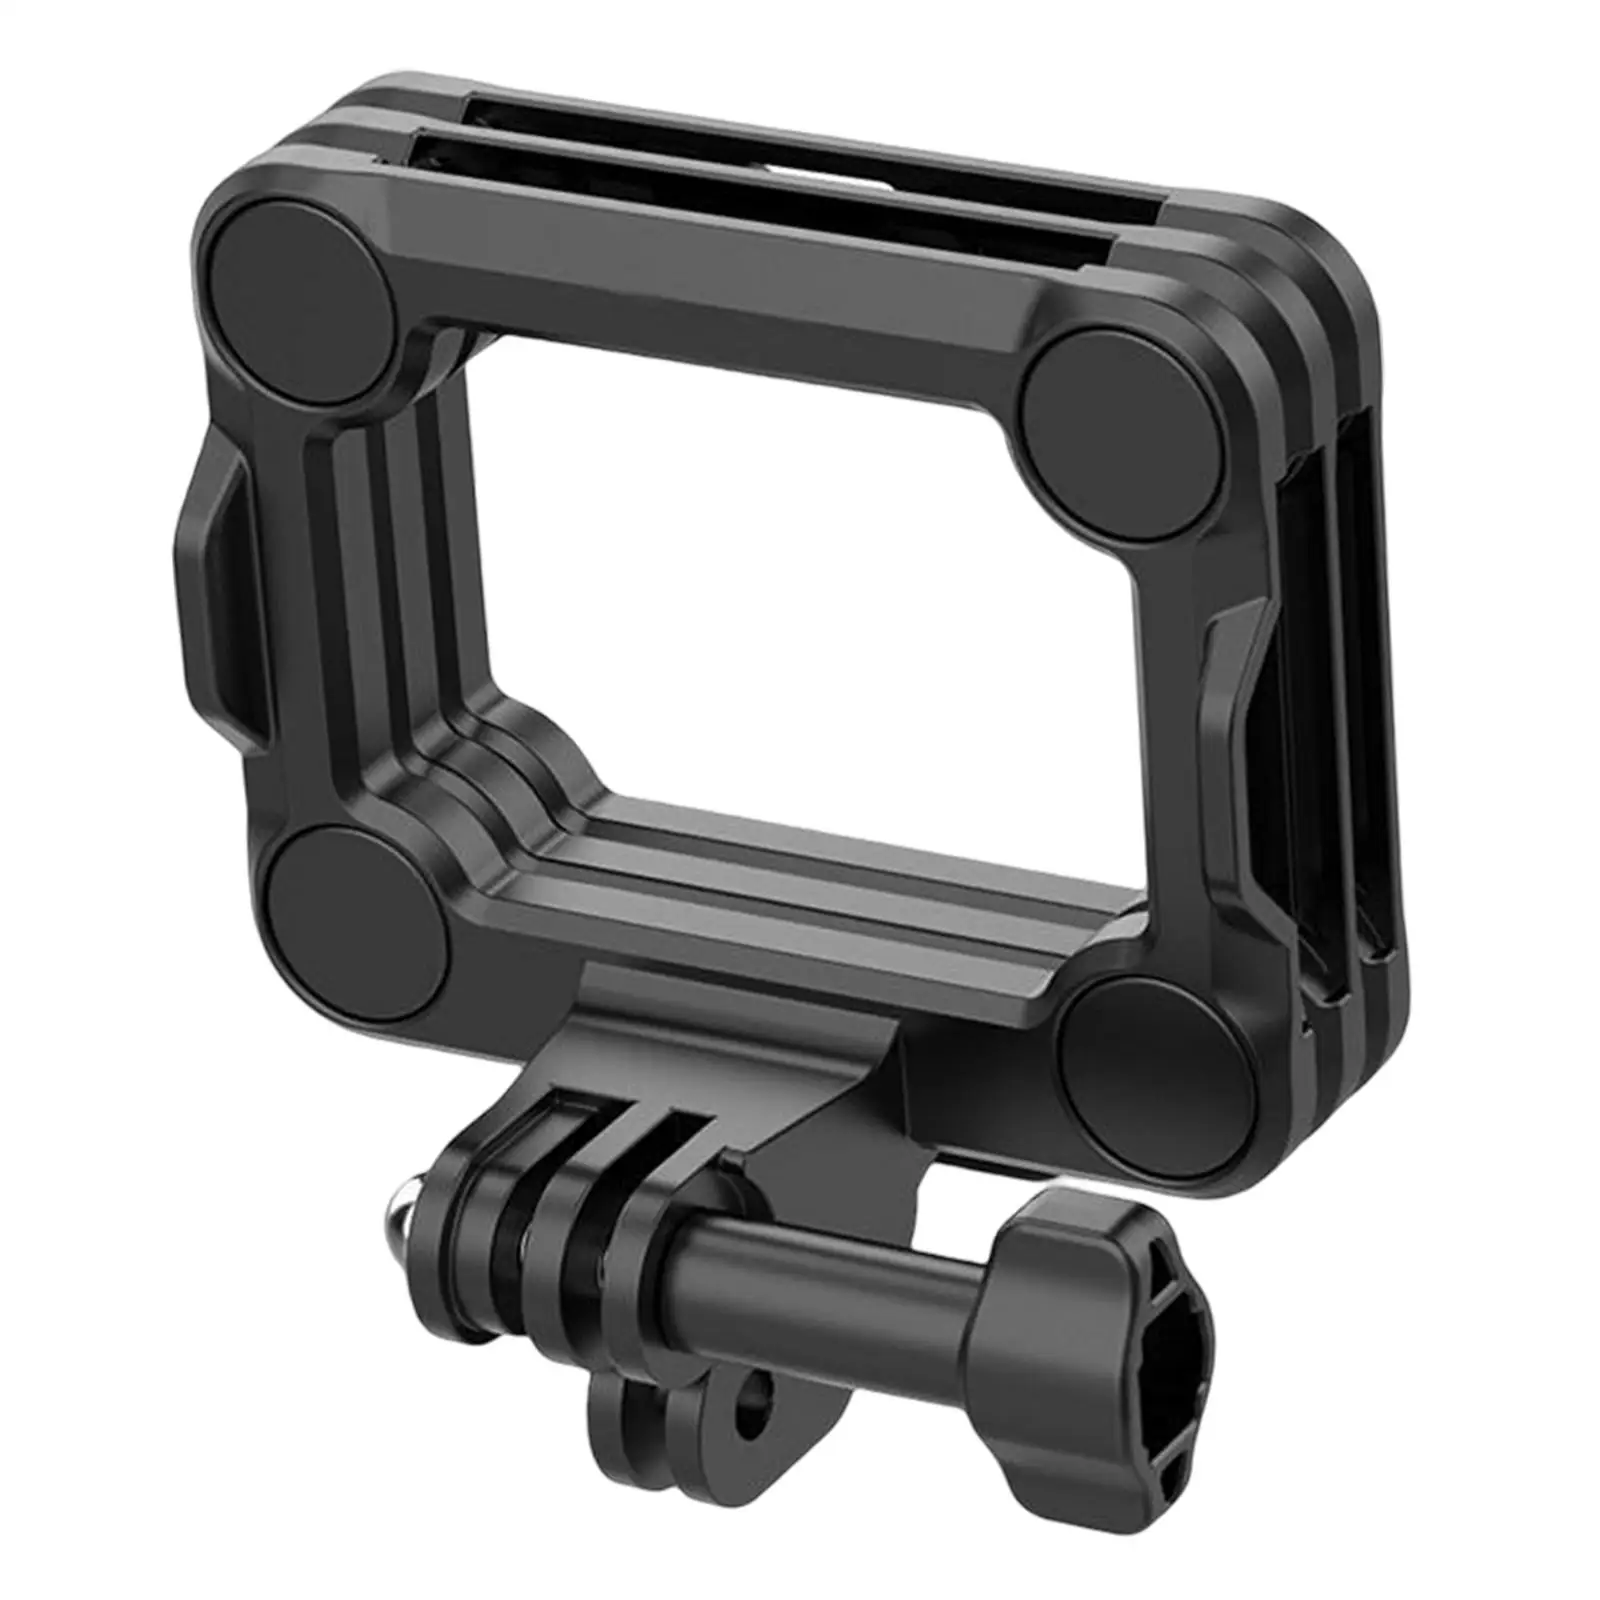 3 in 1 GP-16 Magnetic Action Camera Mount with Lanyard Quick Release Bracket for Action Cameras, 10/9/8, Black